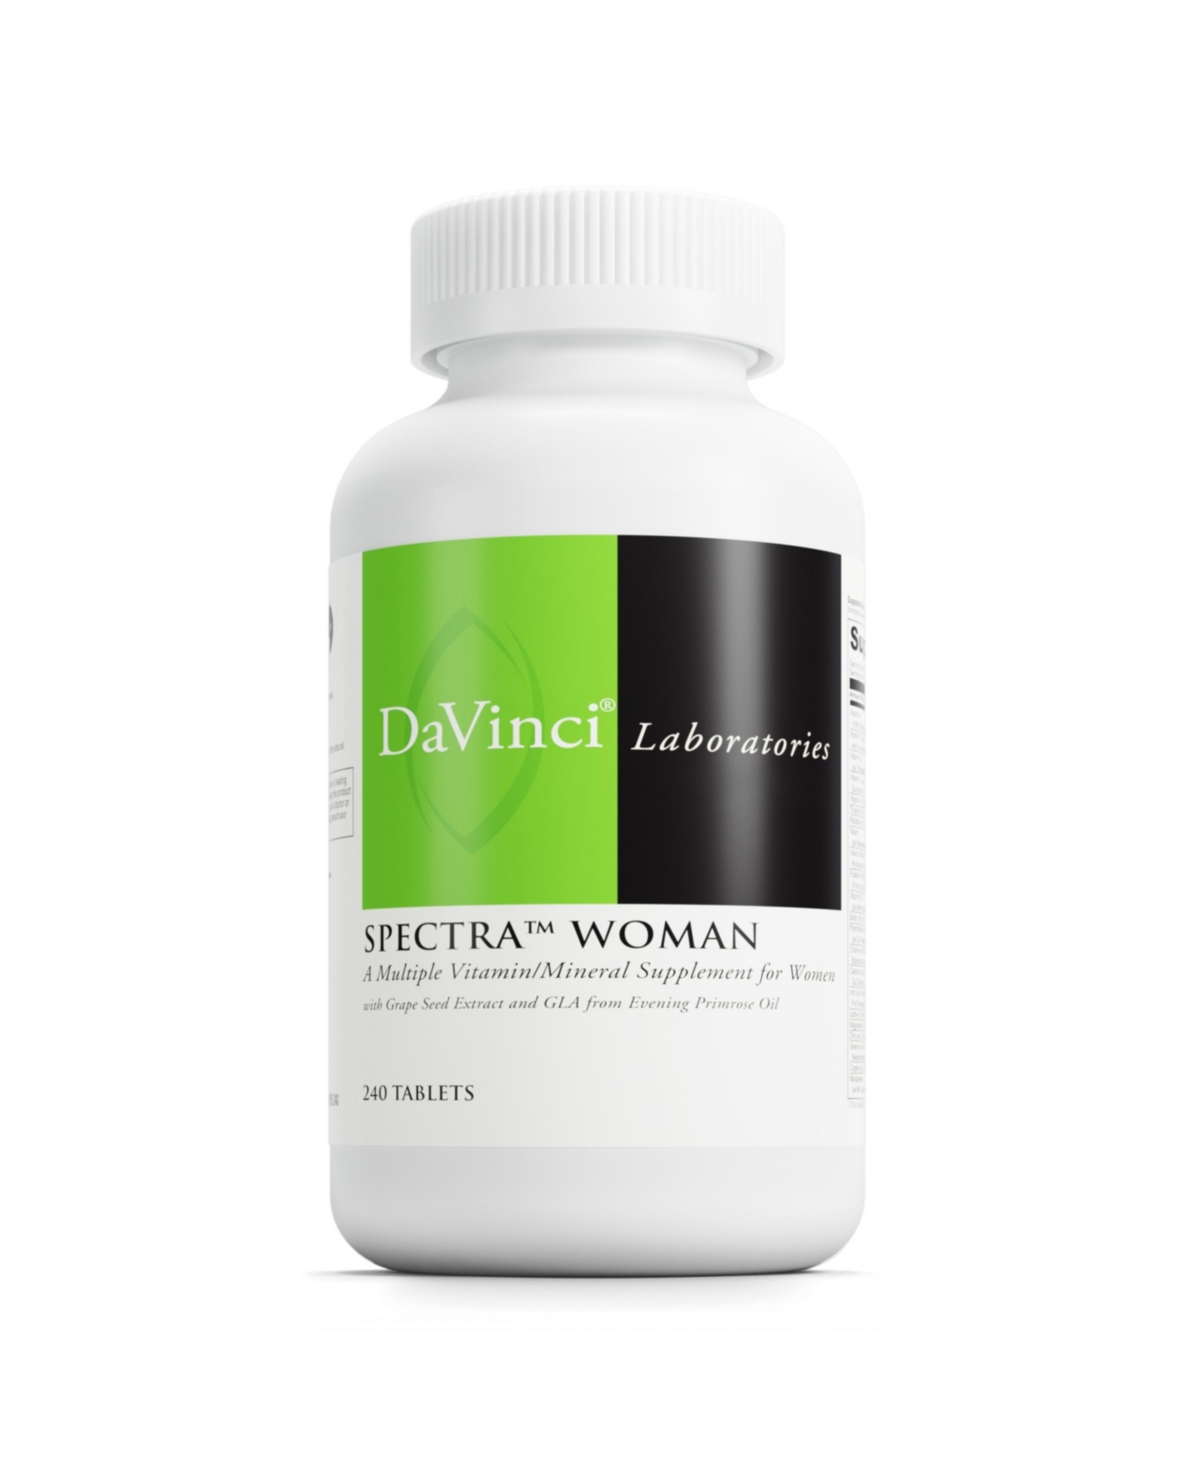 DaVinci Labs Spectra Woman - Dietary Supplement to Support Bone Health and Women's Needs - With Vitamins, Minerals, Calcium, Beta